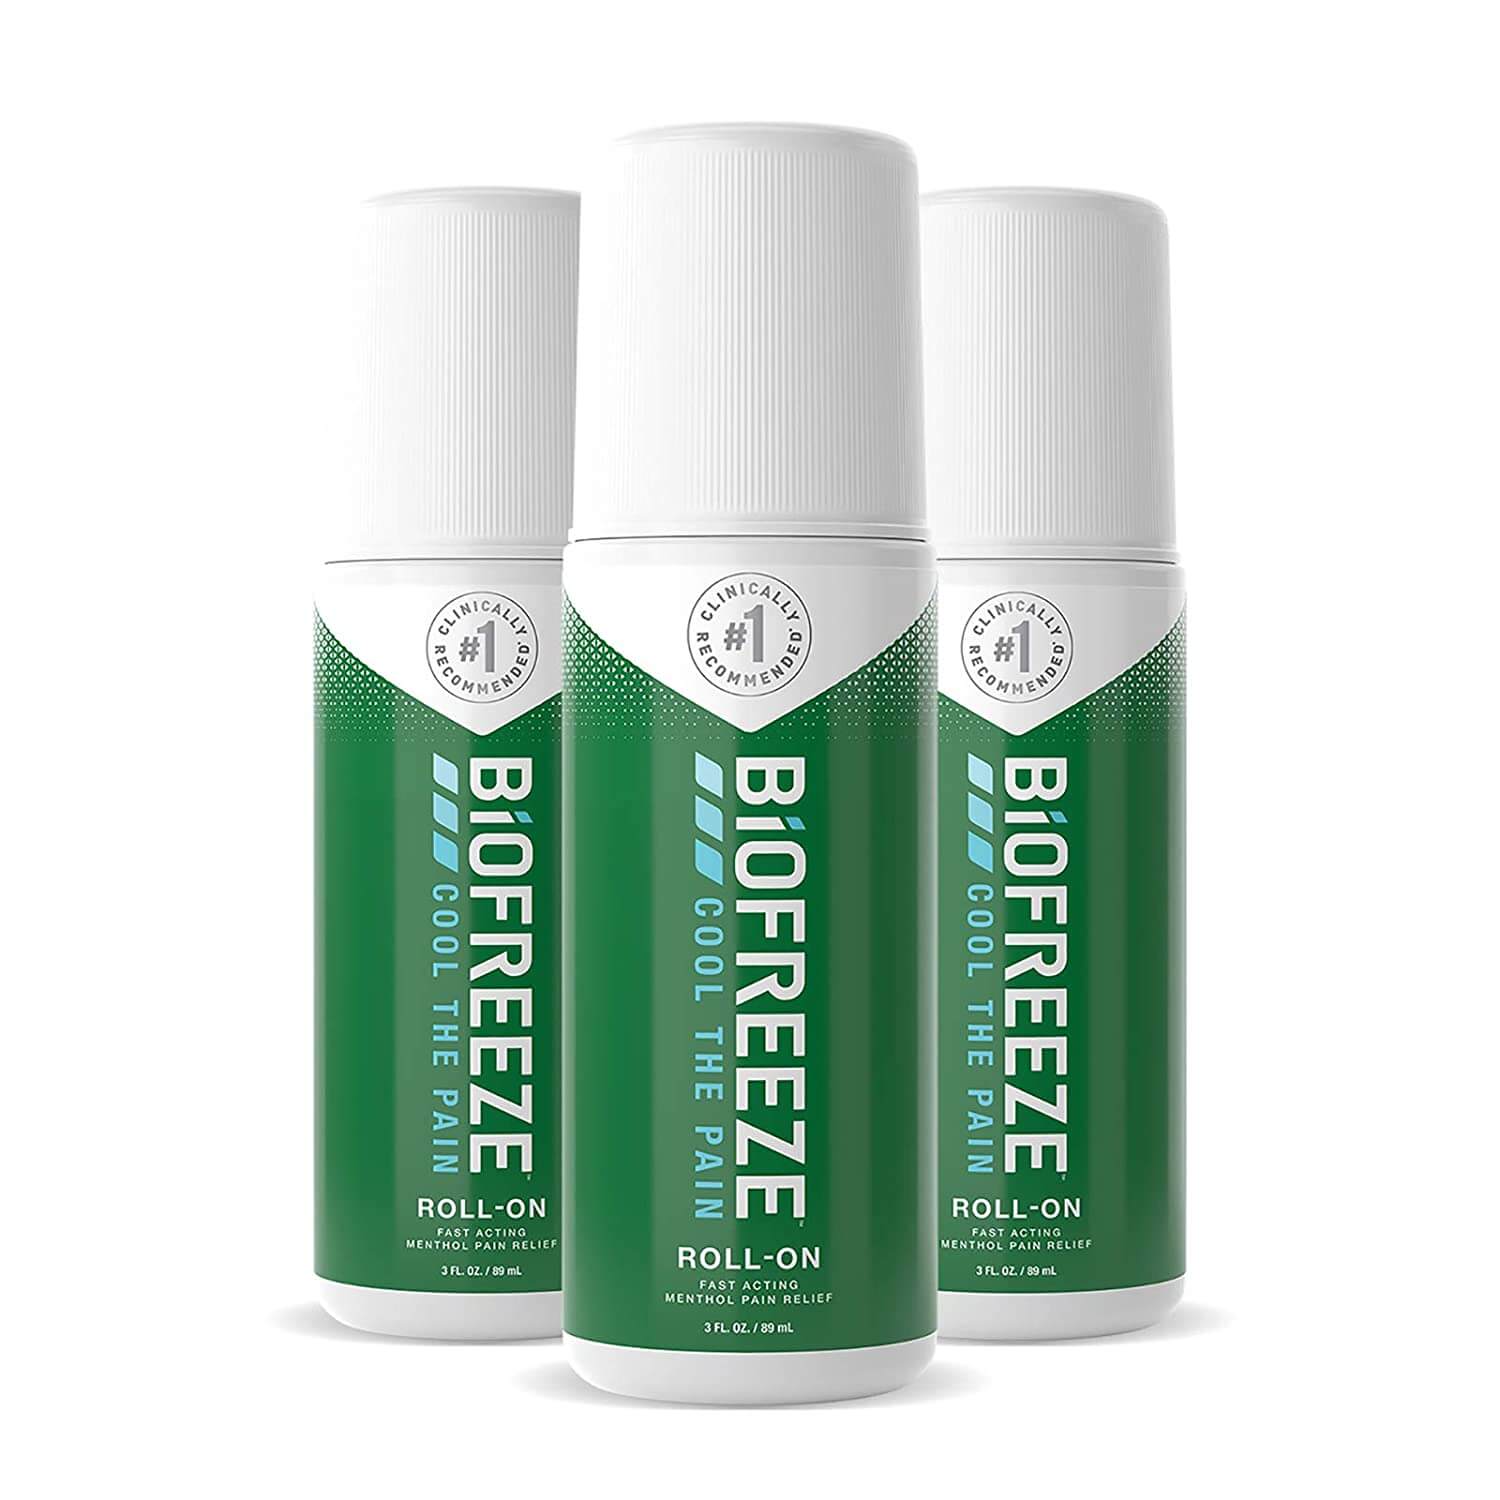 Biofreeze Topical Pain Relief Roll-on Review